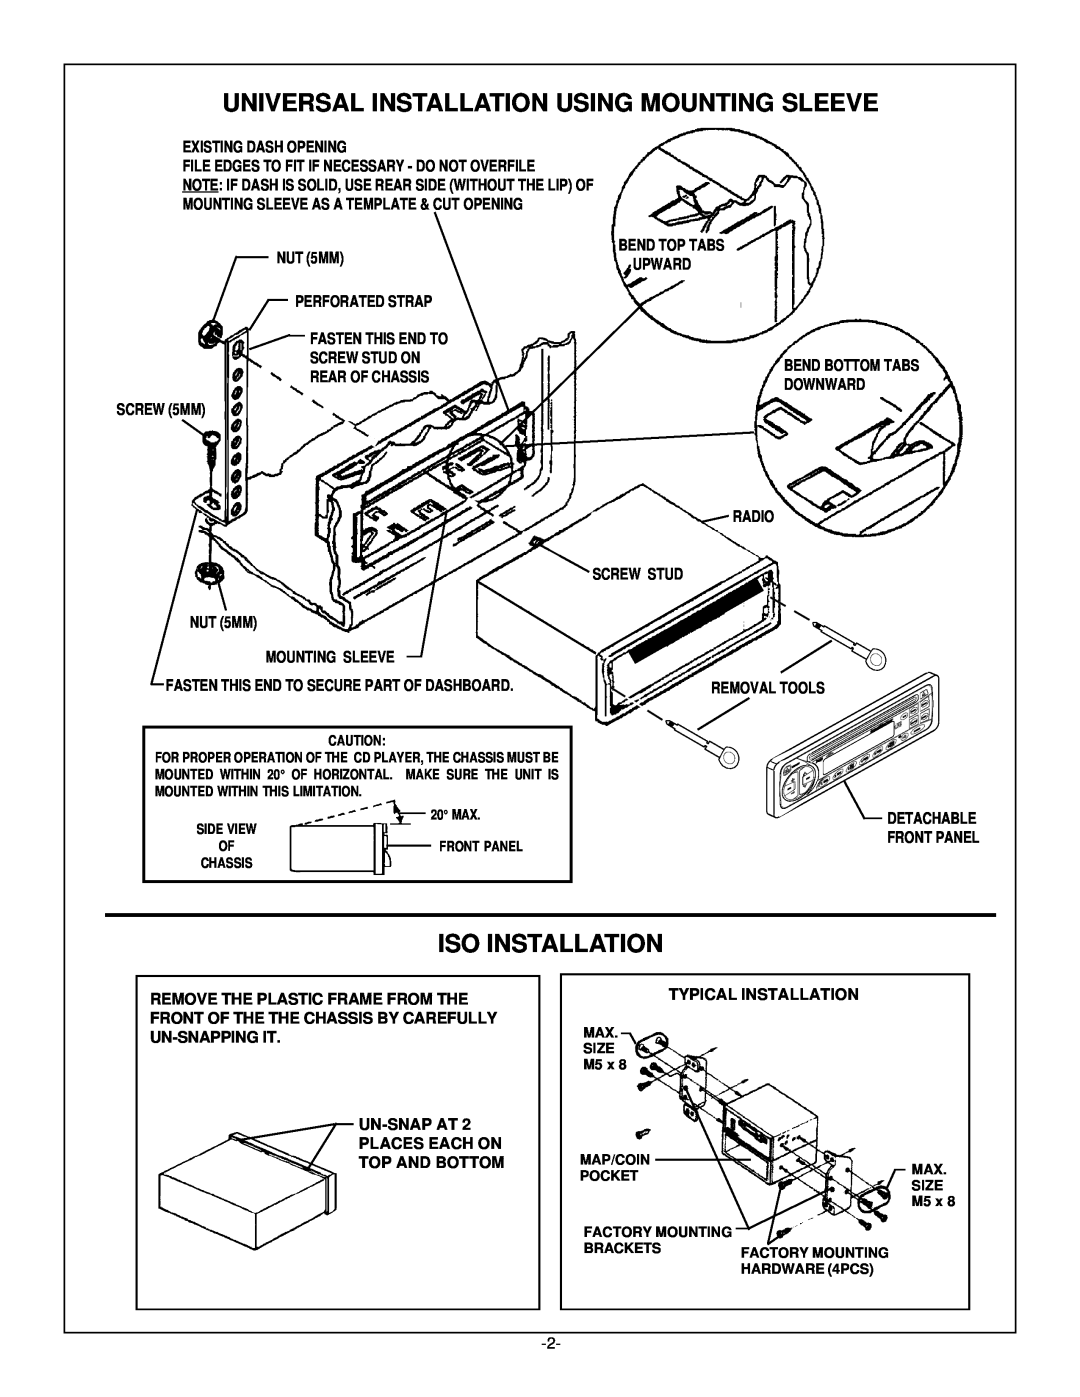 Audiovox Home Stereo System installation instructions Universal Installation Using Mounting Sleeve, Iso Installation 